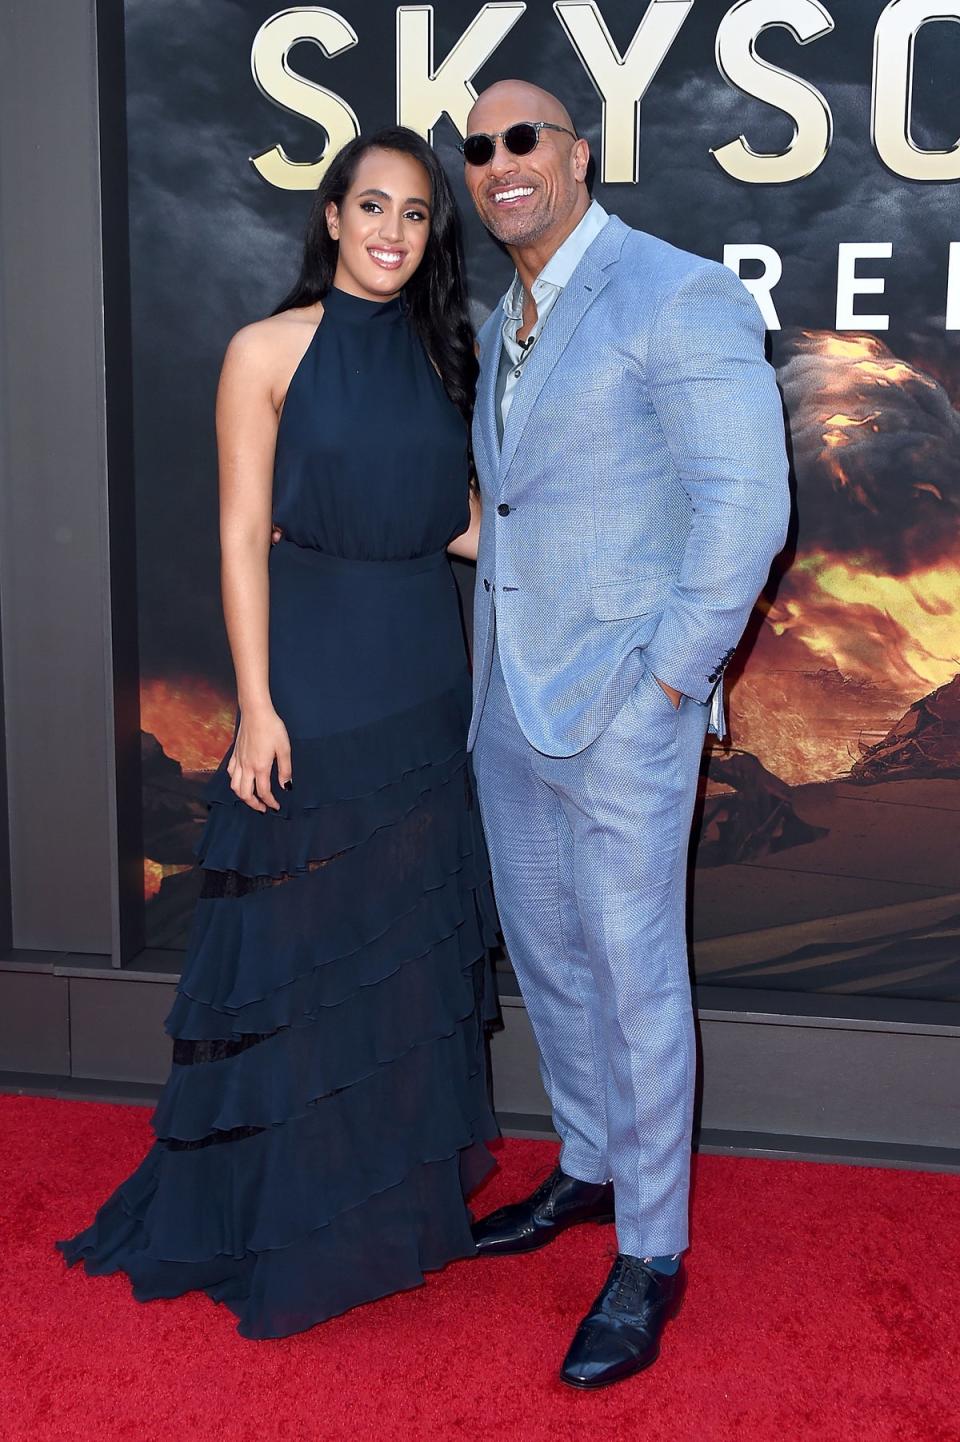 Dwayne Johnson and his daughter Simone Garcia Johnson attend the 'Skyscraper' New York Premiere at AMC Loews Lincoln Square on July 10, 2018 (Getty Images)